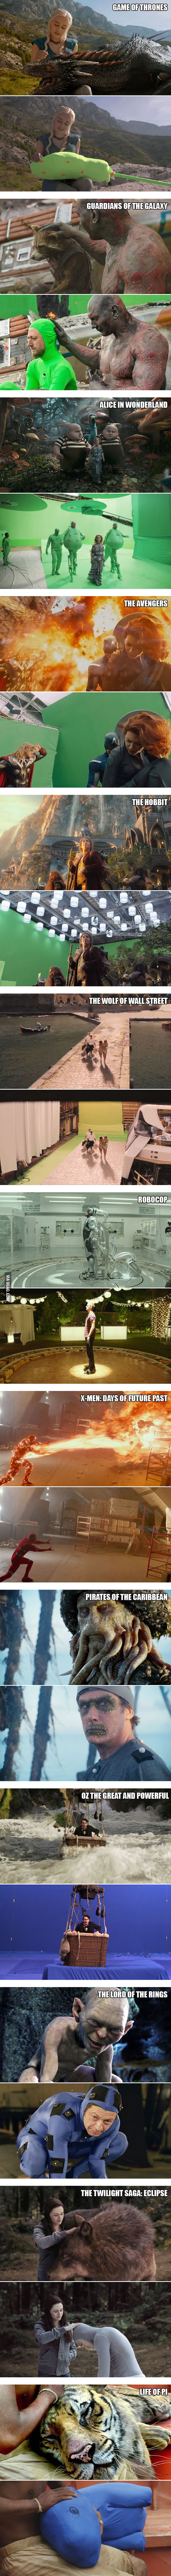 Movie Scenes: Before And After Special Effects